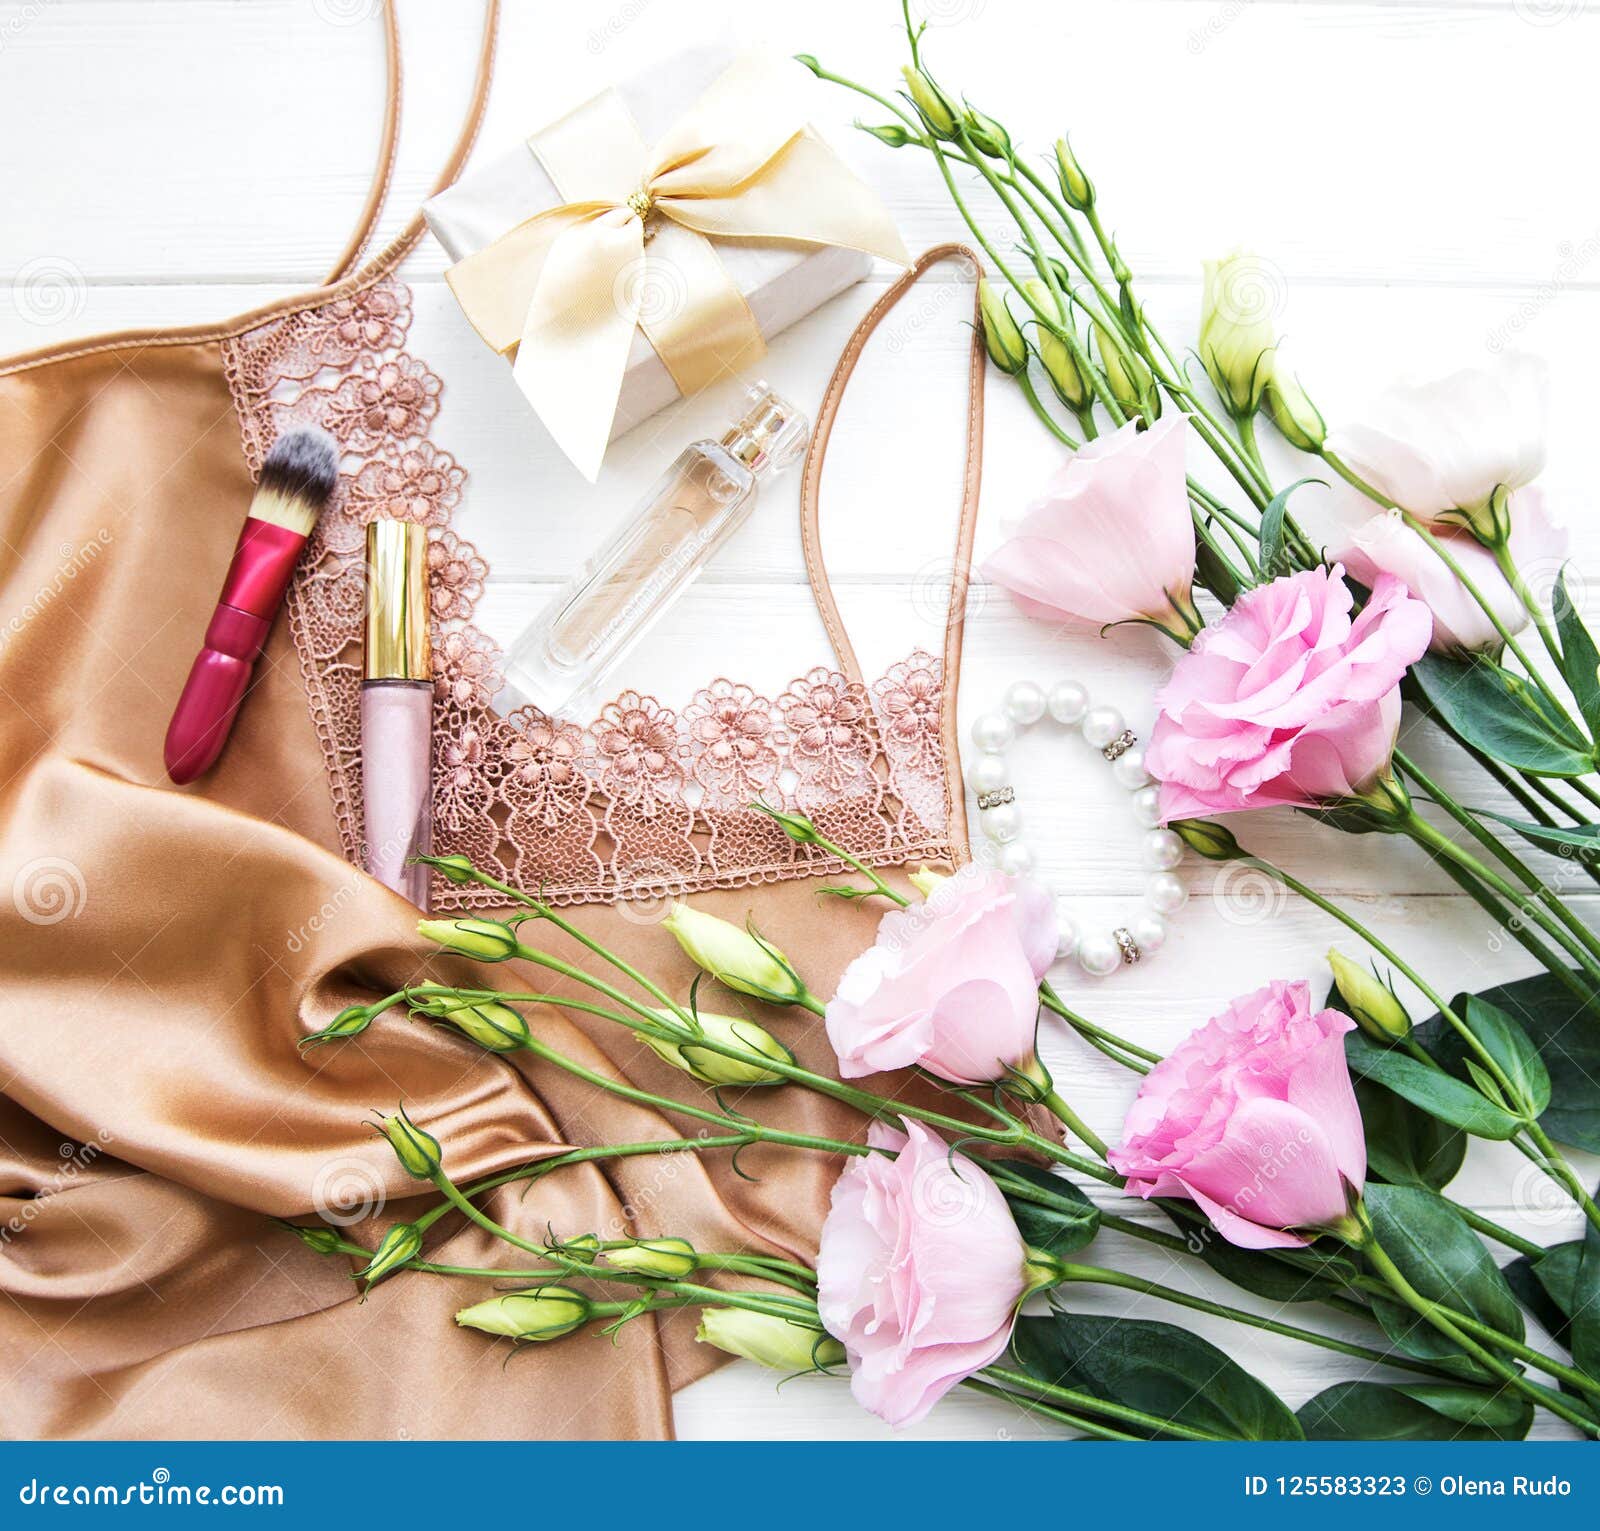 Lingerie with Flowers and Gift Box Stock Image - Image of lifestyle